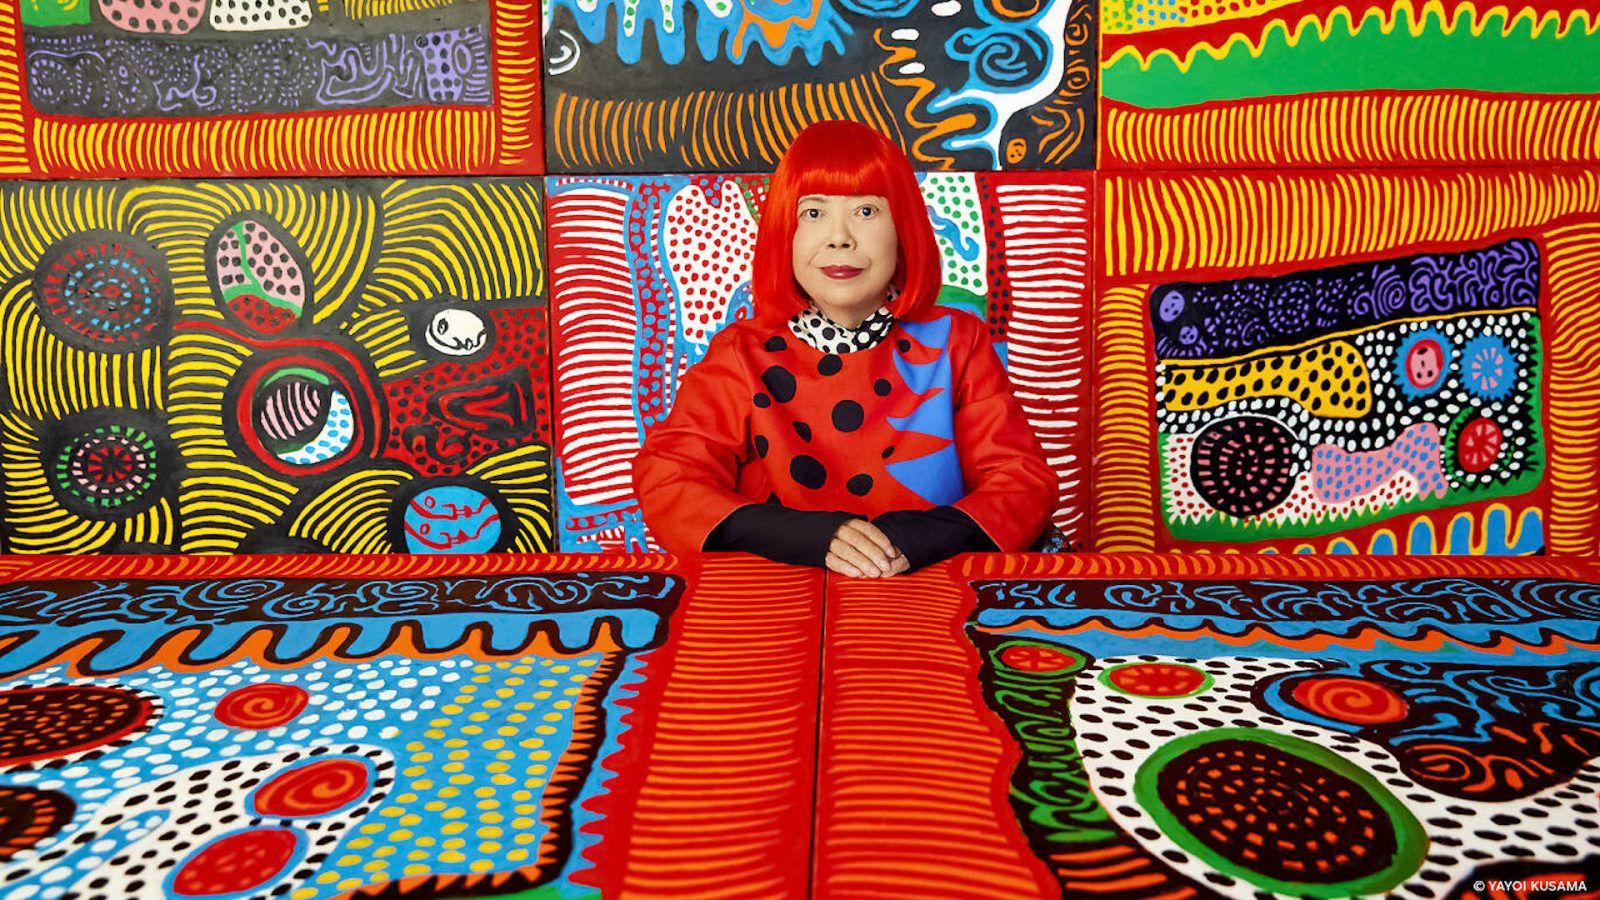 Yayoi Kusama exhibition to debut at M+ in celebration of the museum’s first anniversary